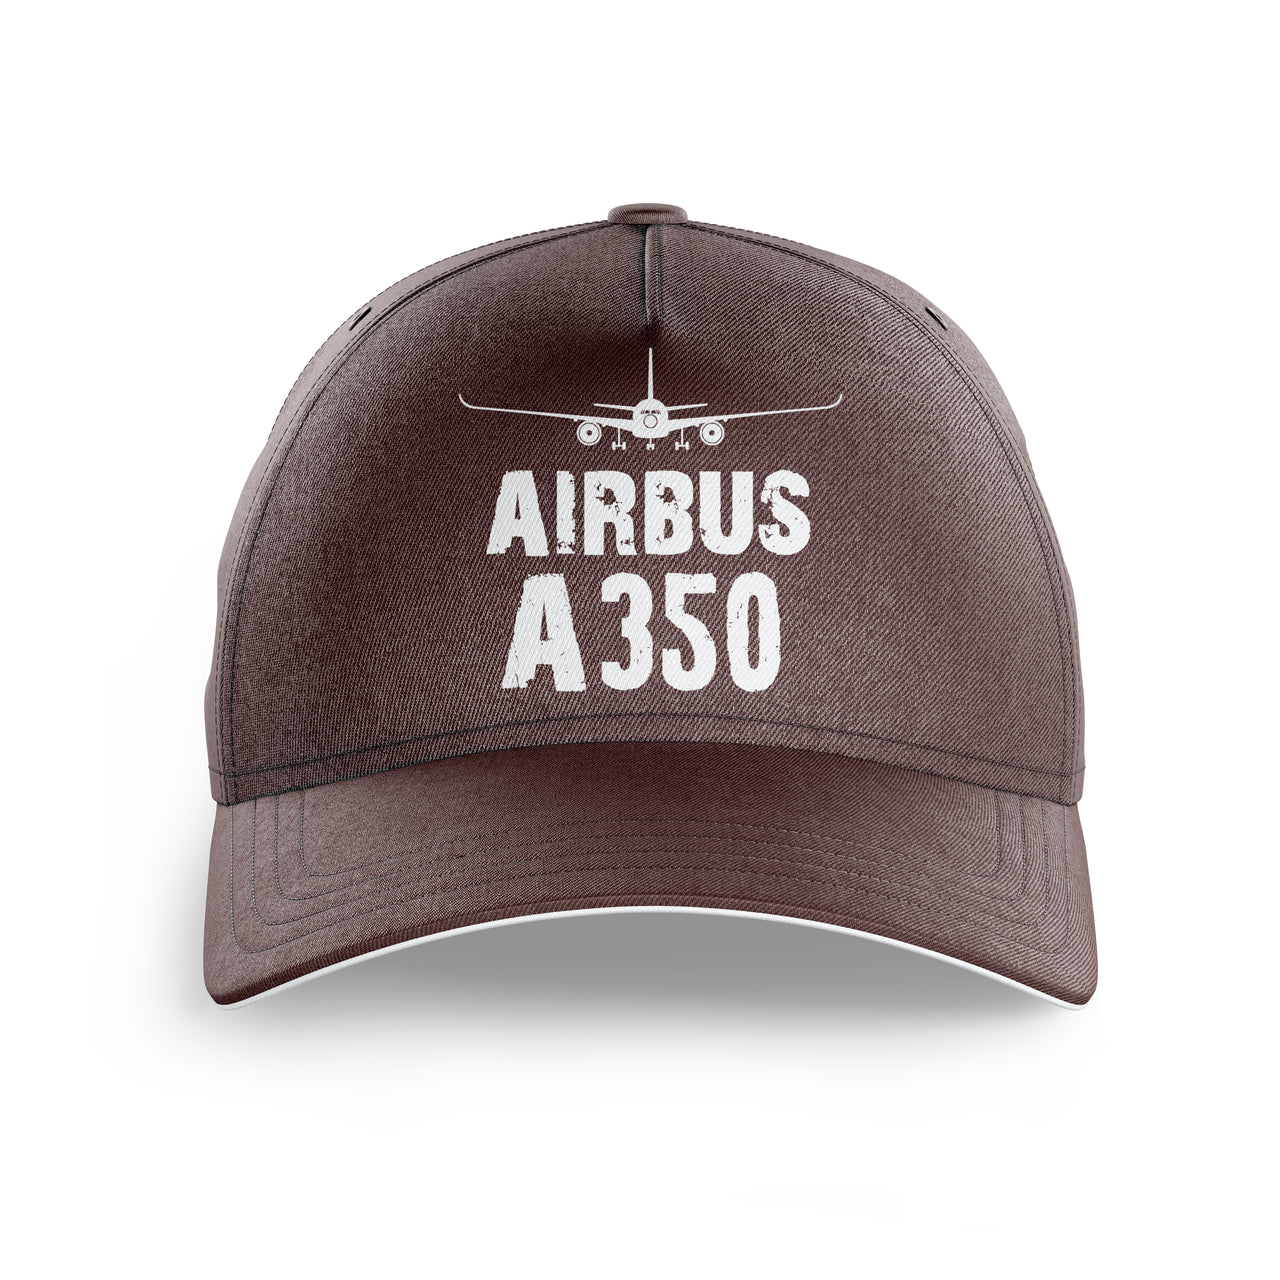 Airbus A350 & Plane Printed Hats